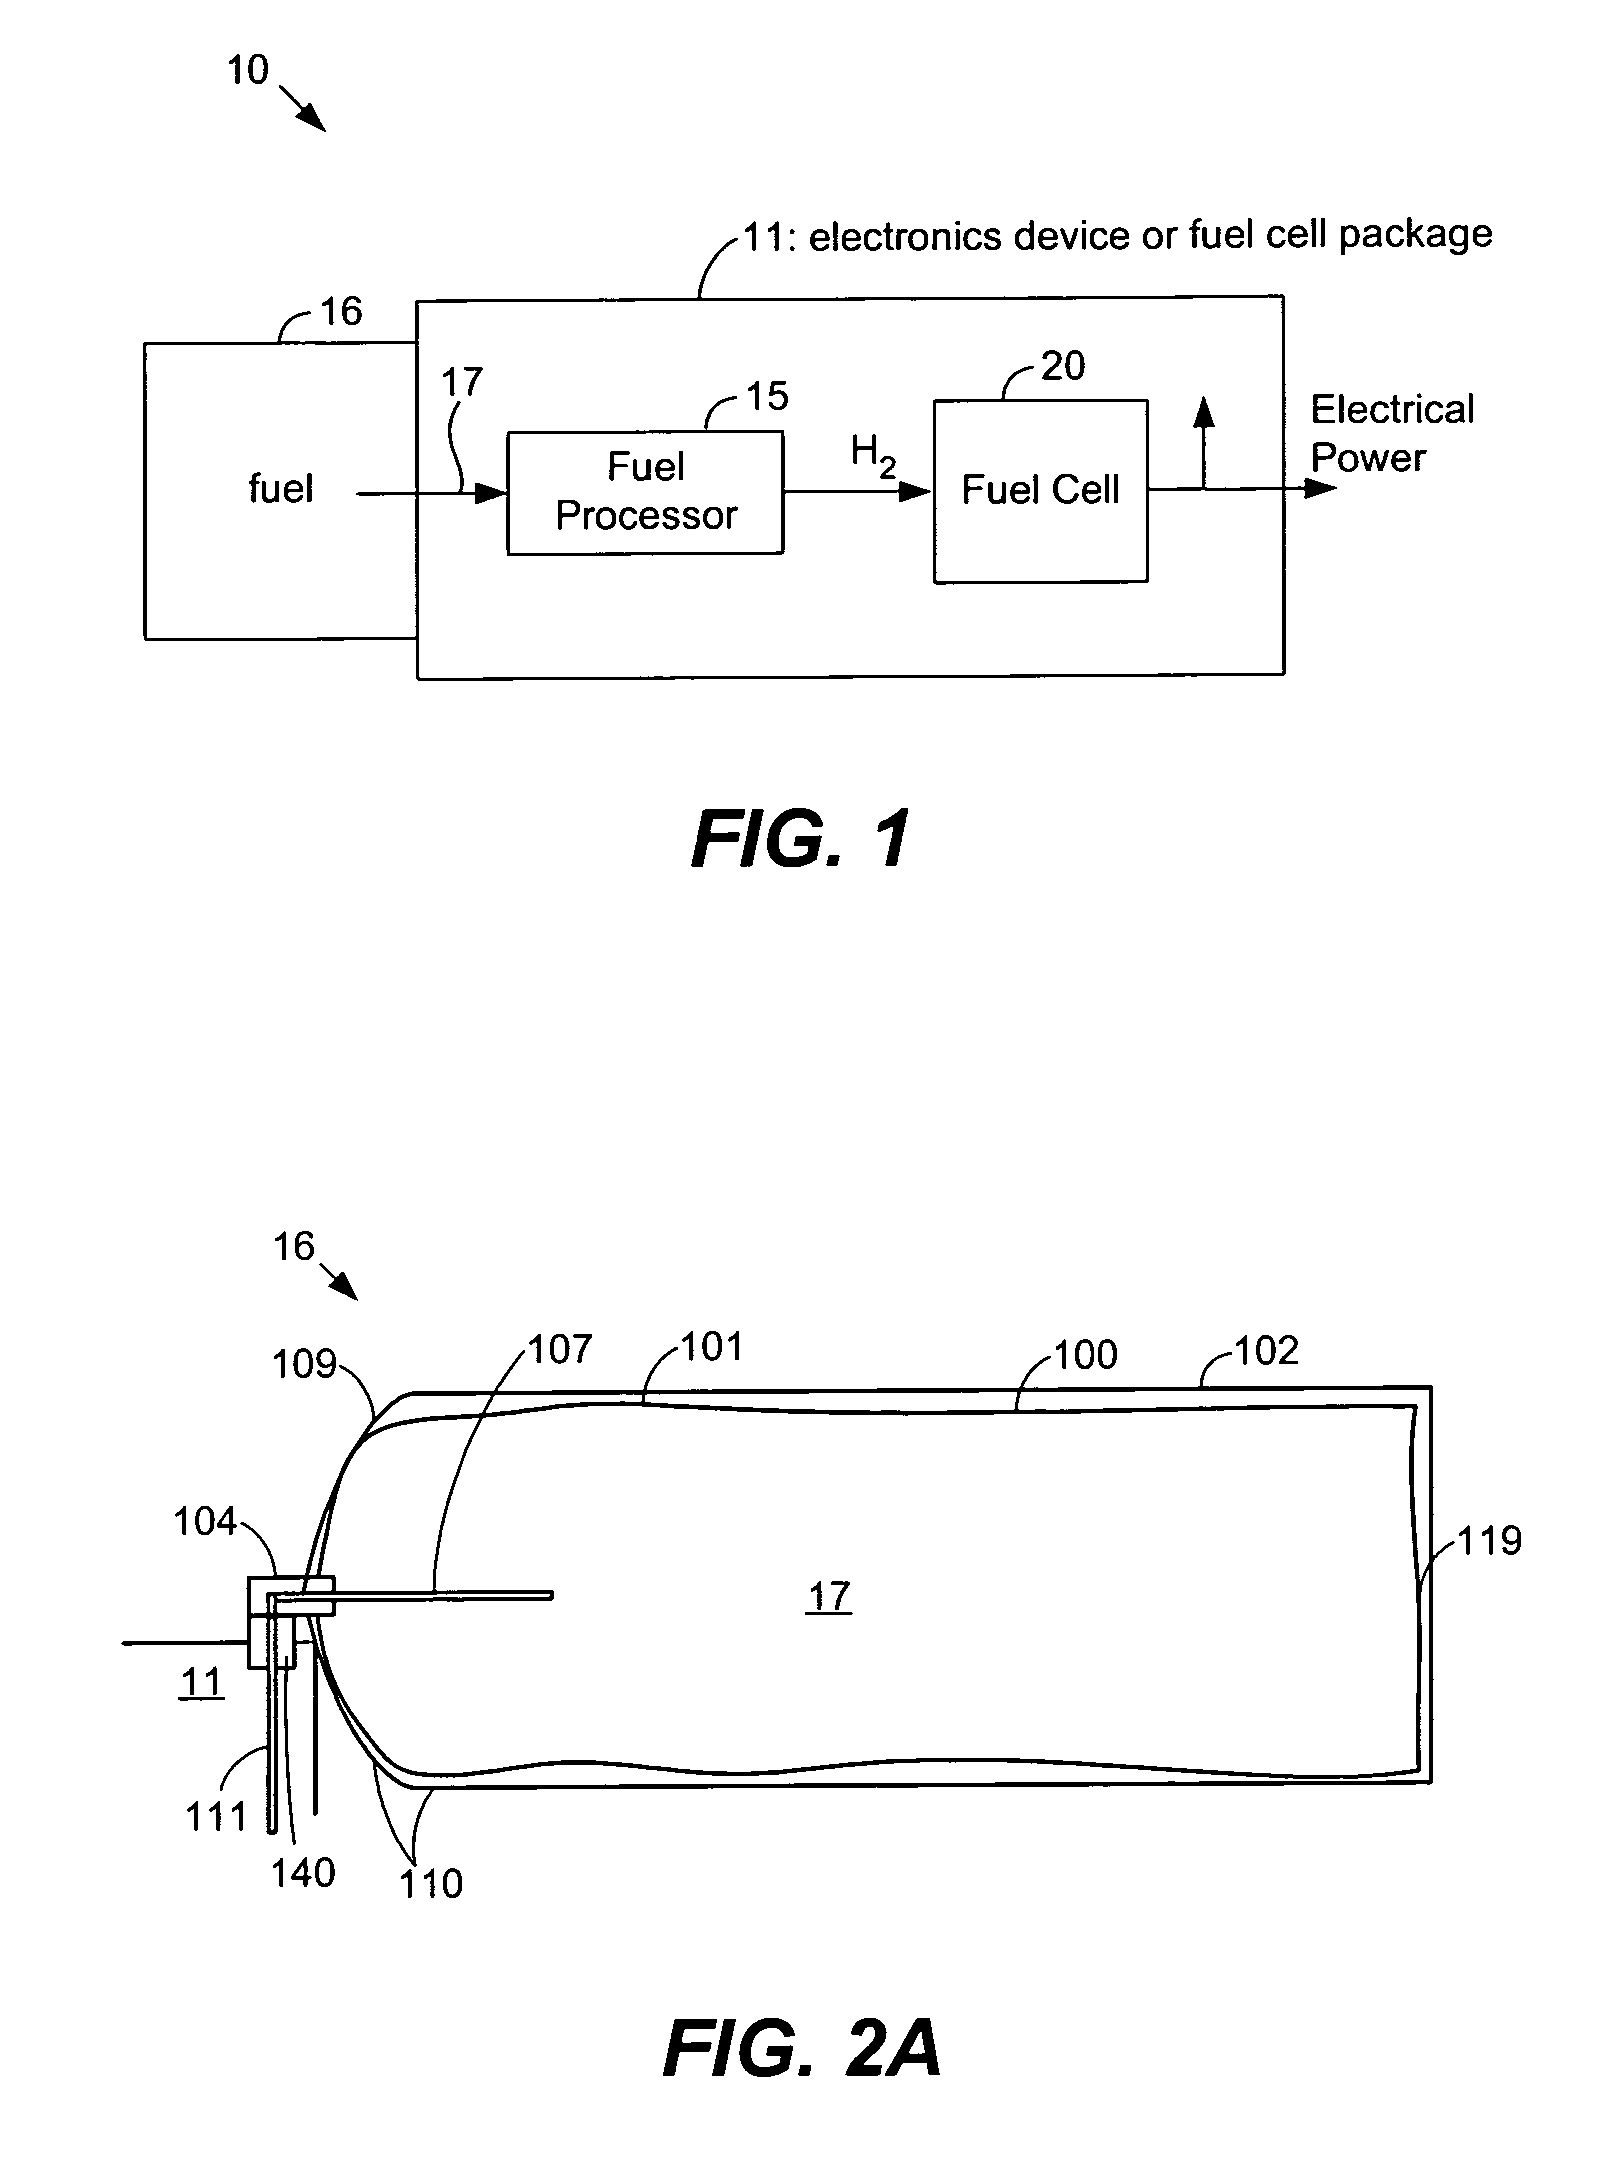 Disposable component on a fuel cartridge and for use with a portable fuel cell system